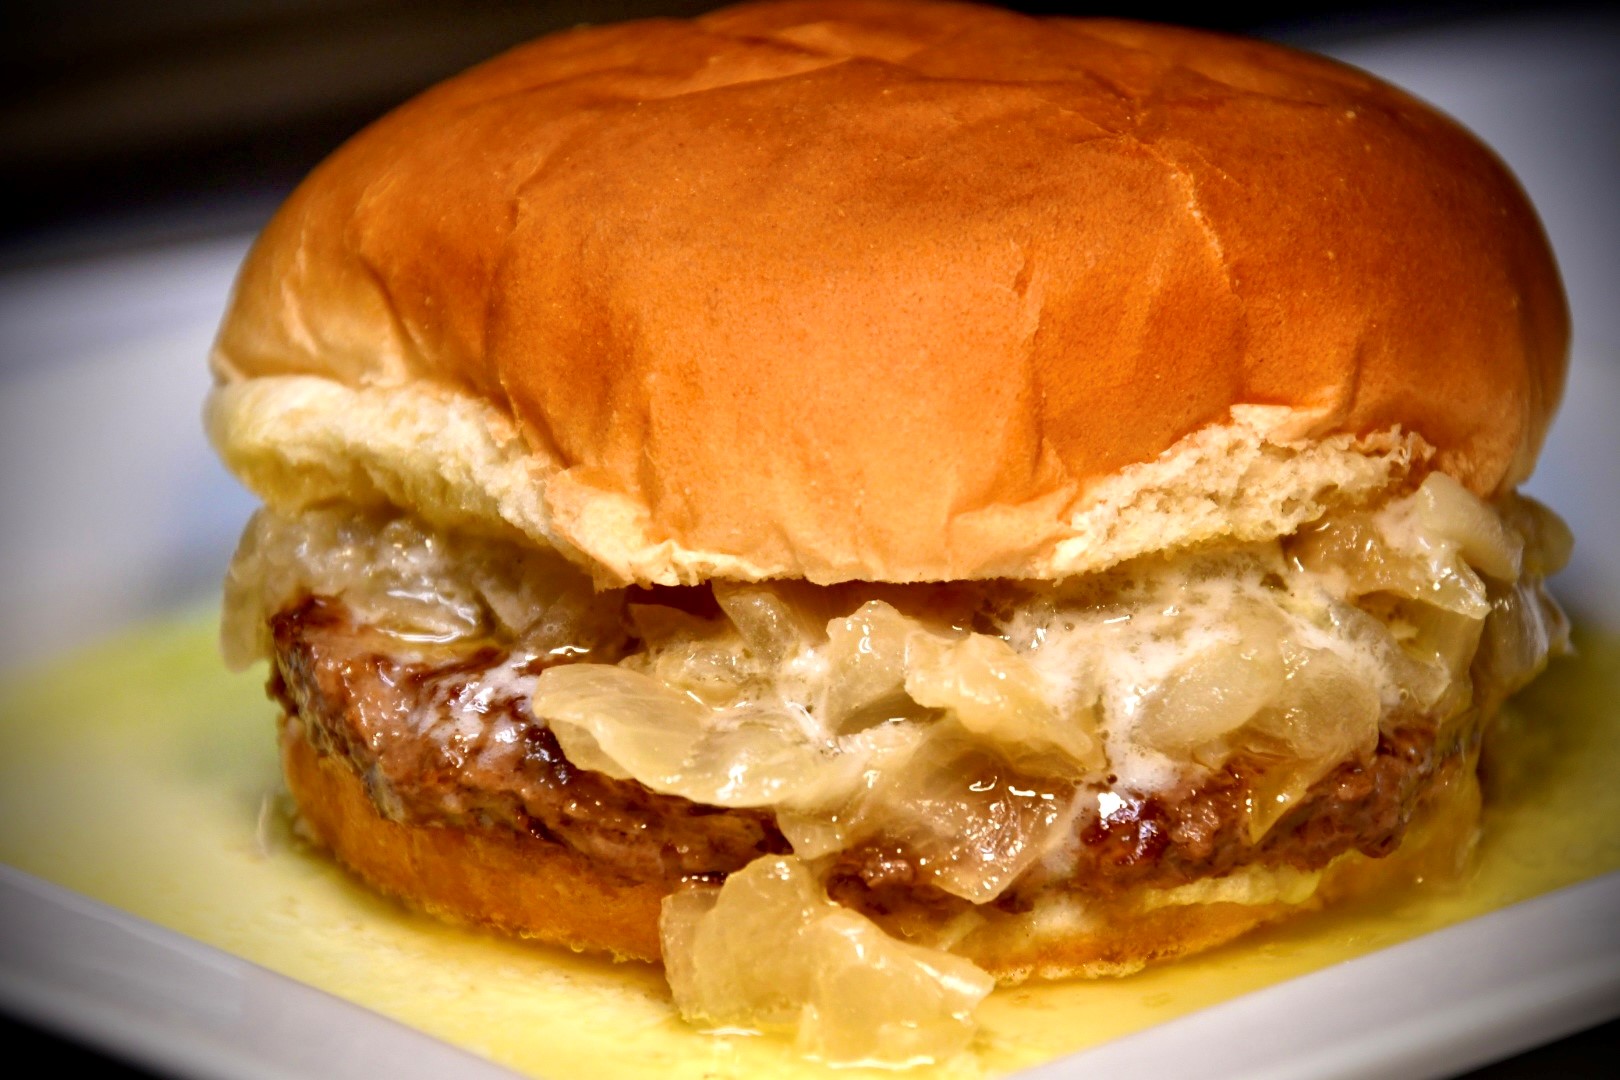 Solly's Grille butter burger